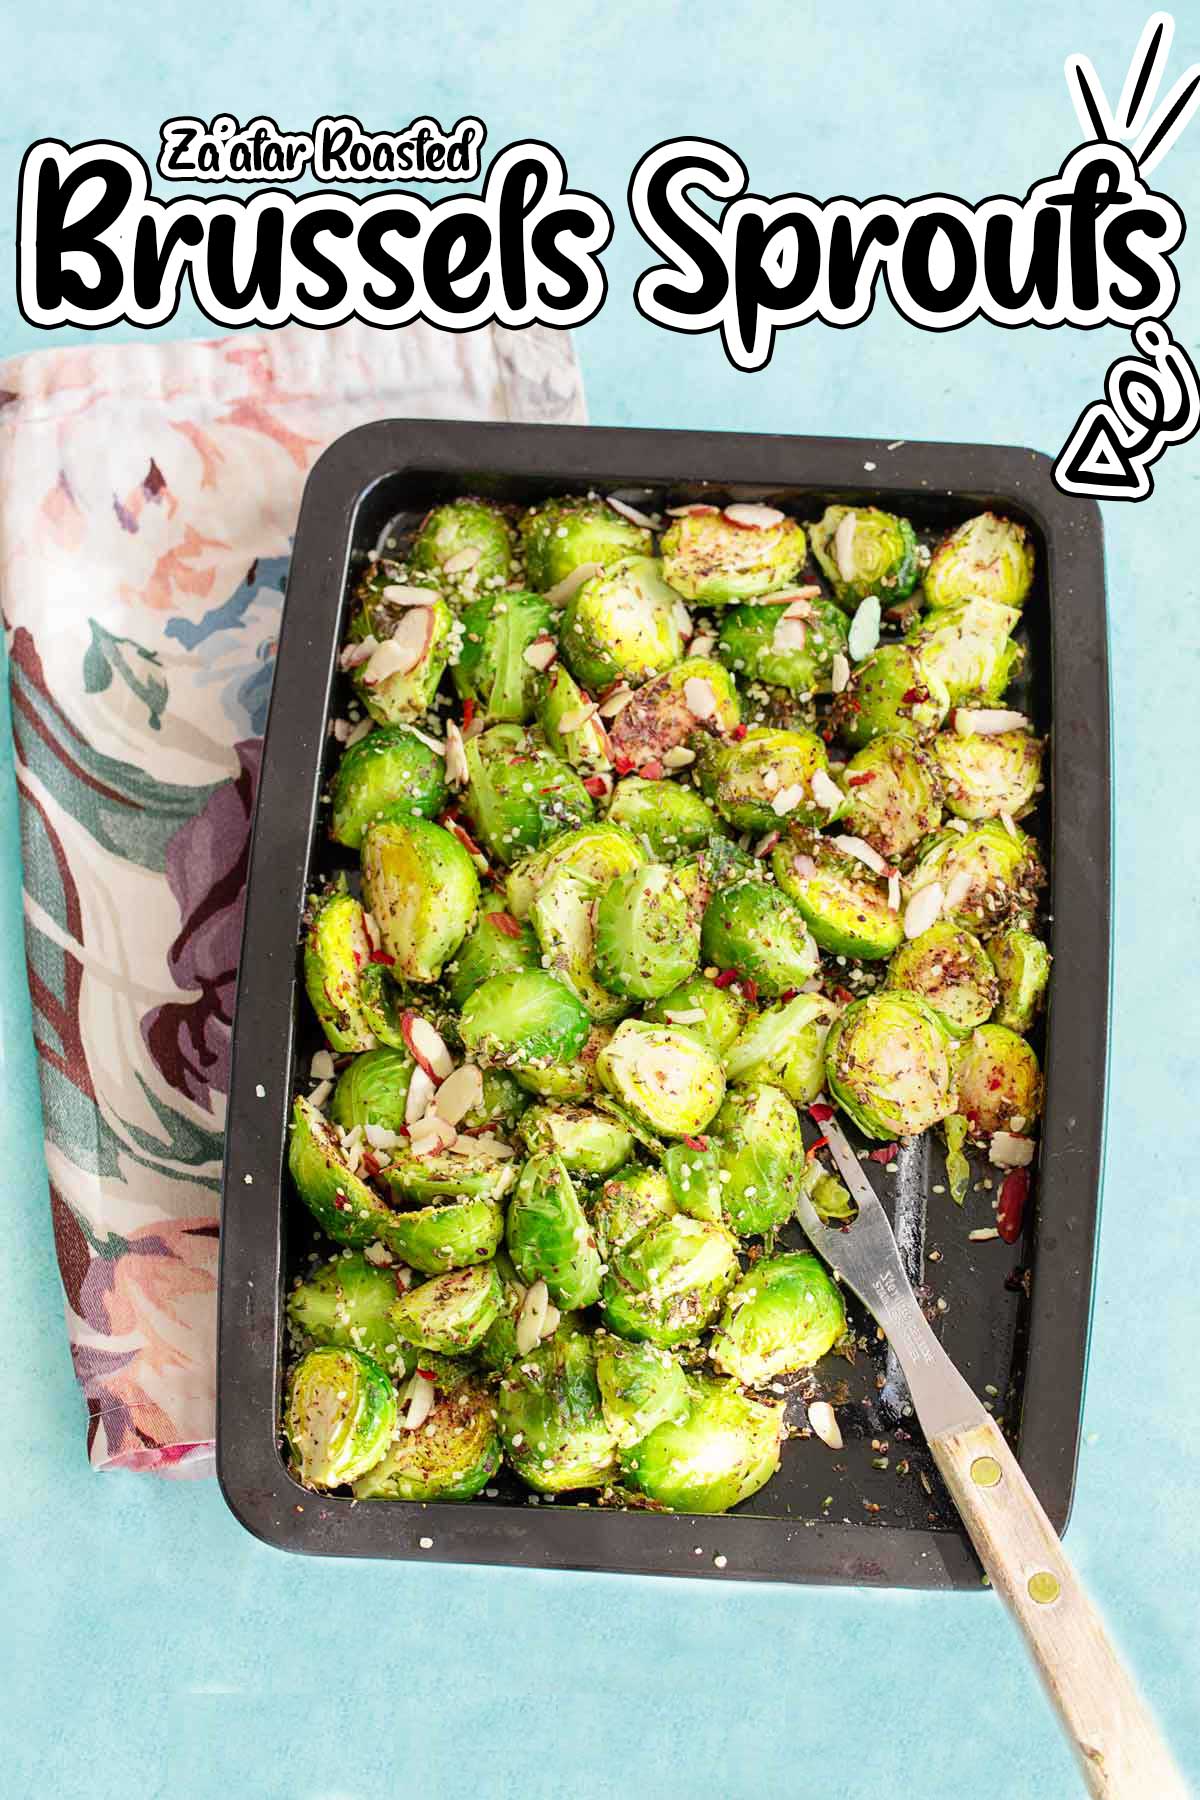 Top view of a black sheete pan with the sprouts in it and placed over a blue background